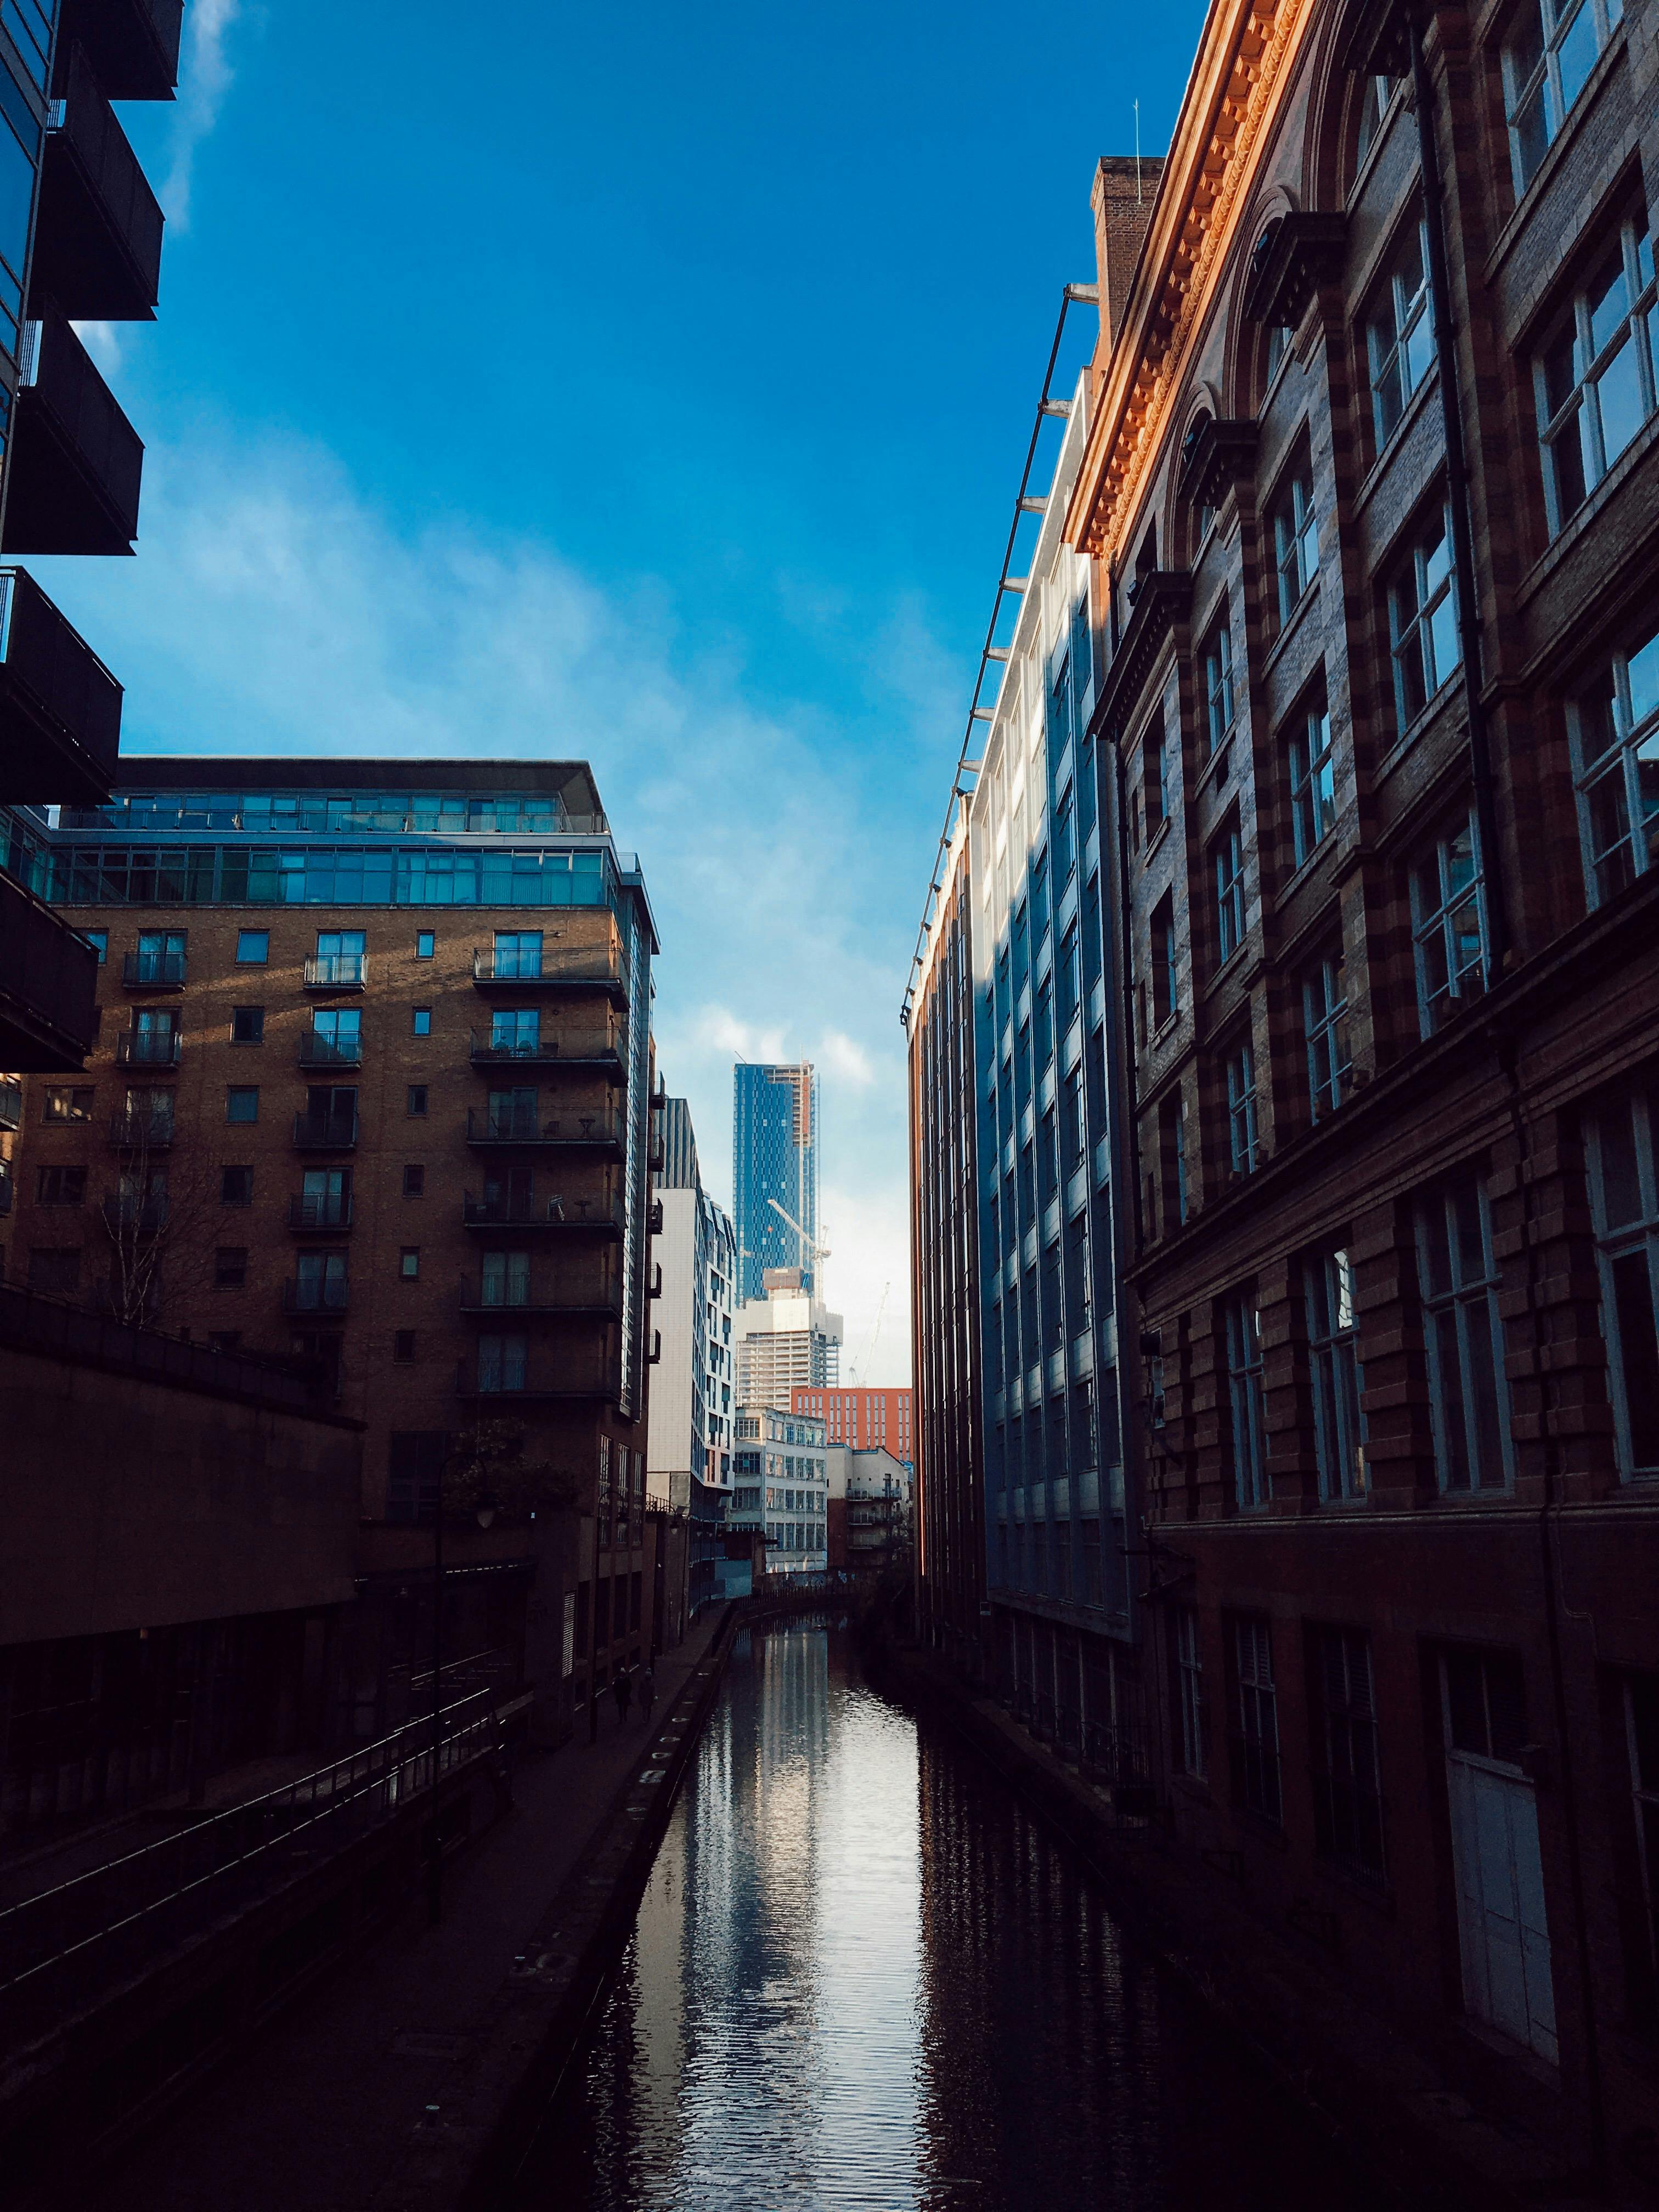 Free stock photo of #manchester #city #space